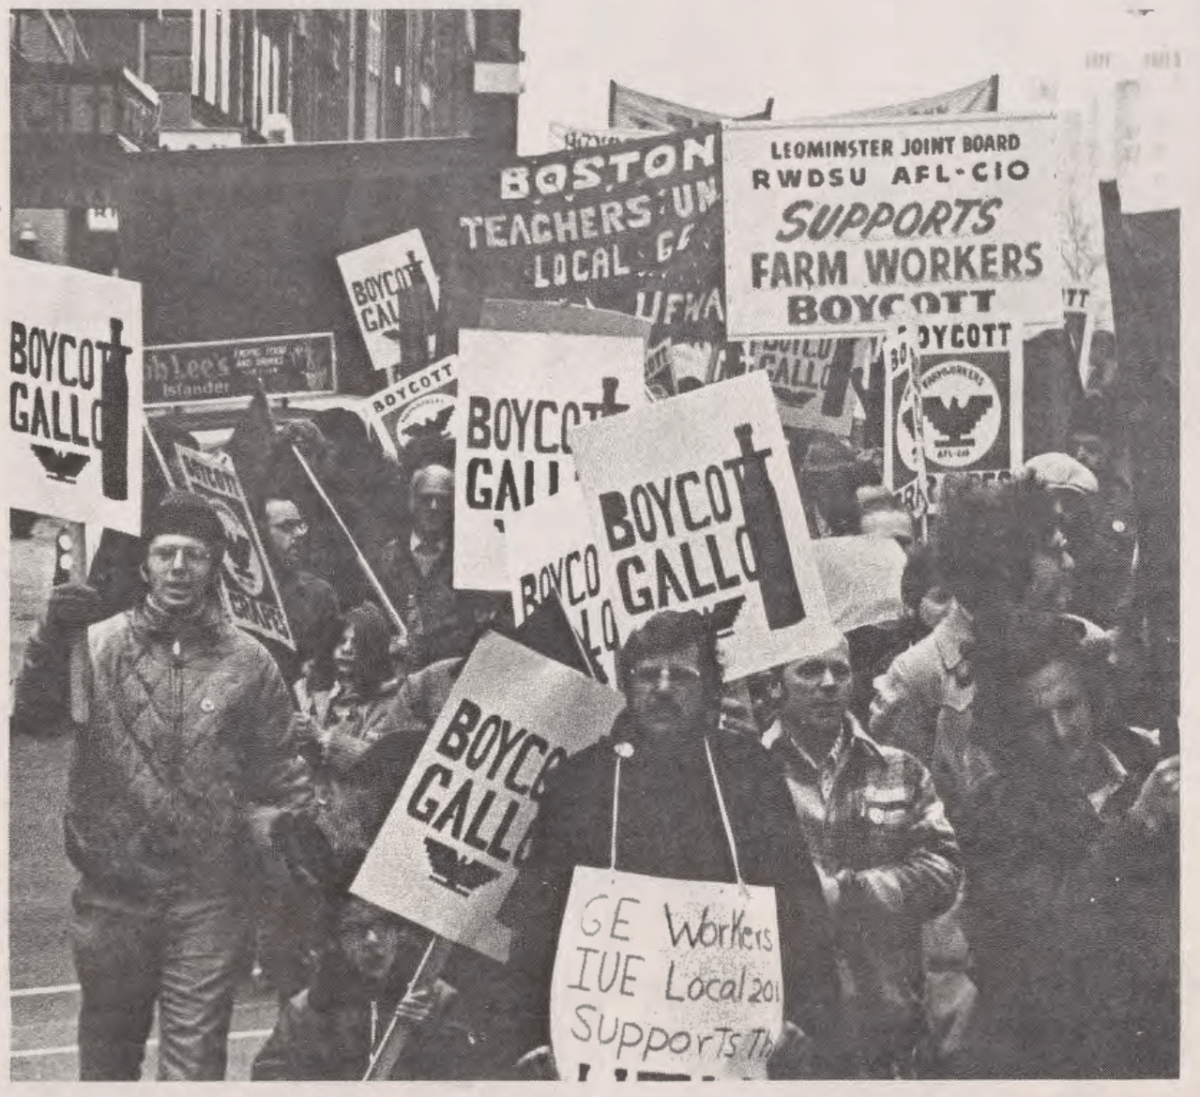 Image of people standing on a picket line holding signs in support of the United Farm Workers from the February 1975 issue of the Boston Union Teacher